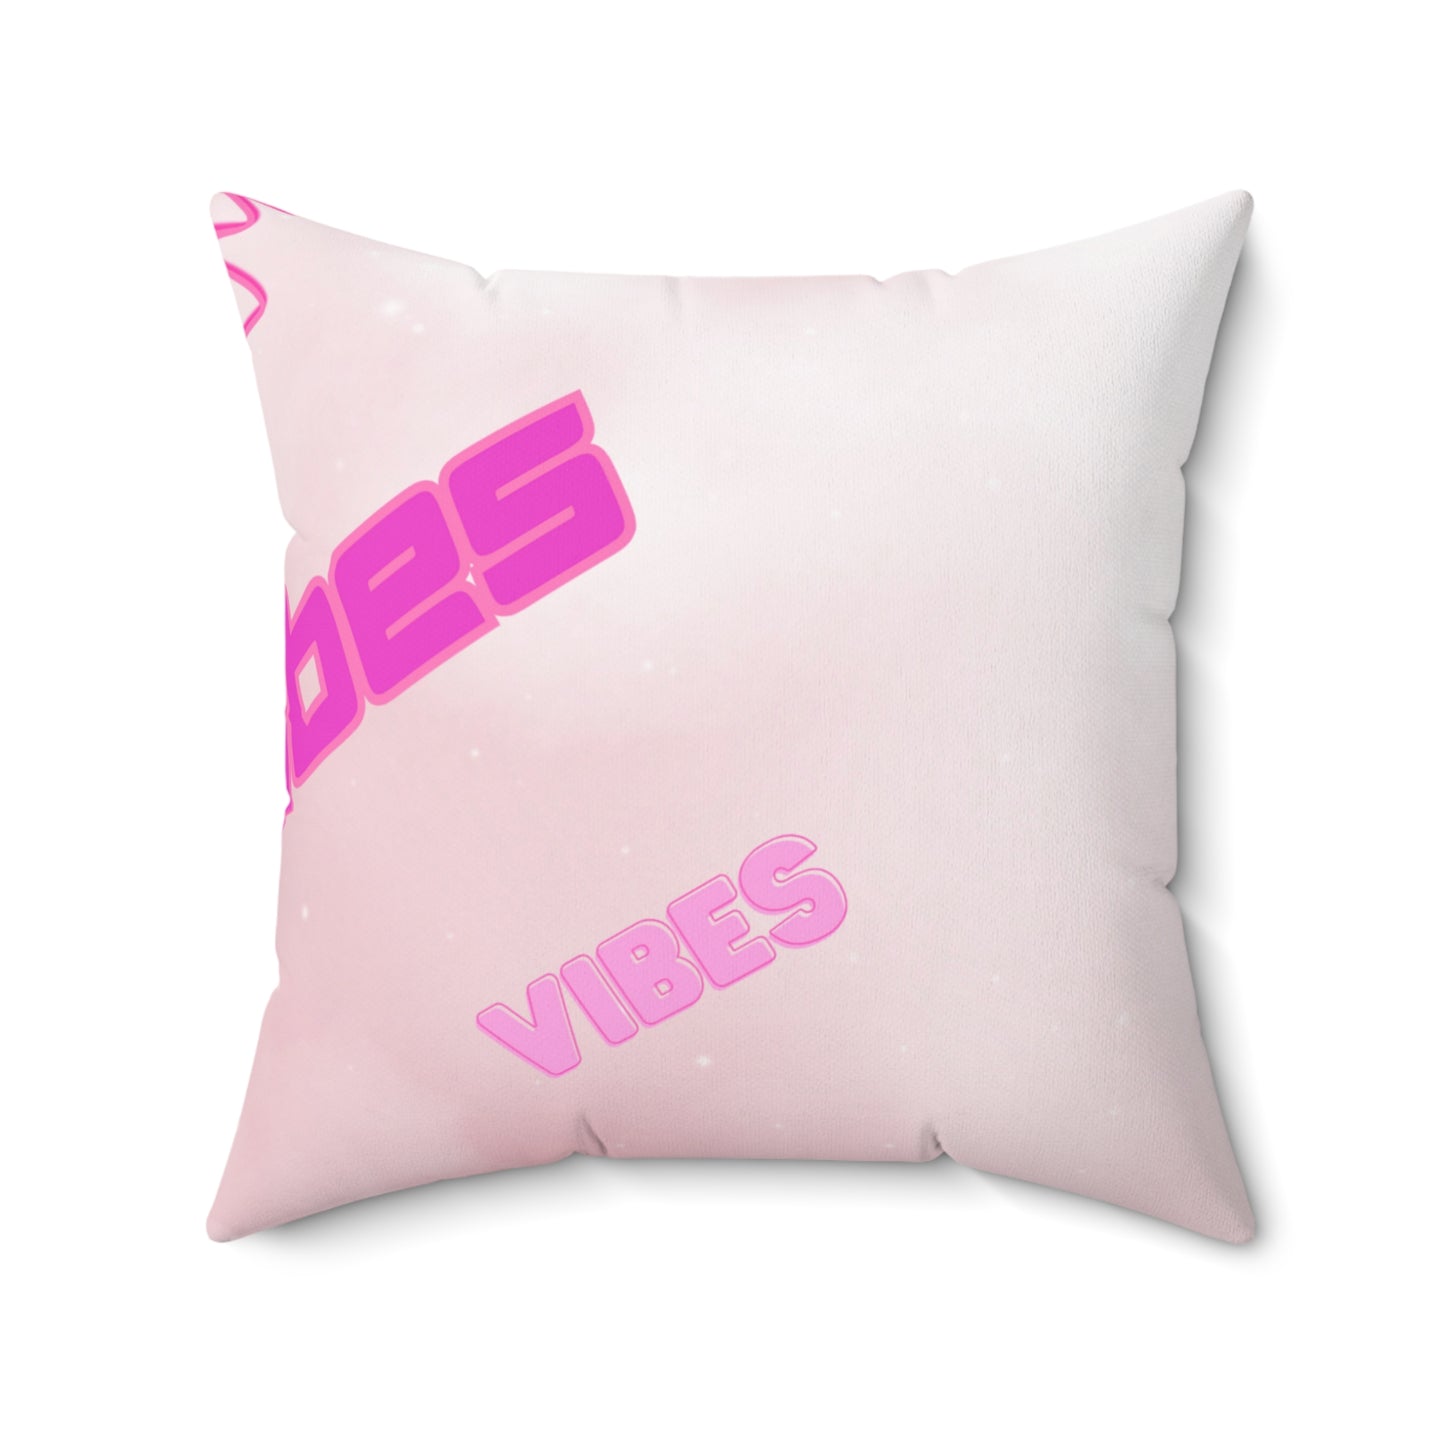 Glow Pink Vibes Square Pillow Multiple Sizes